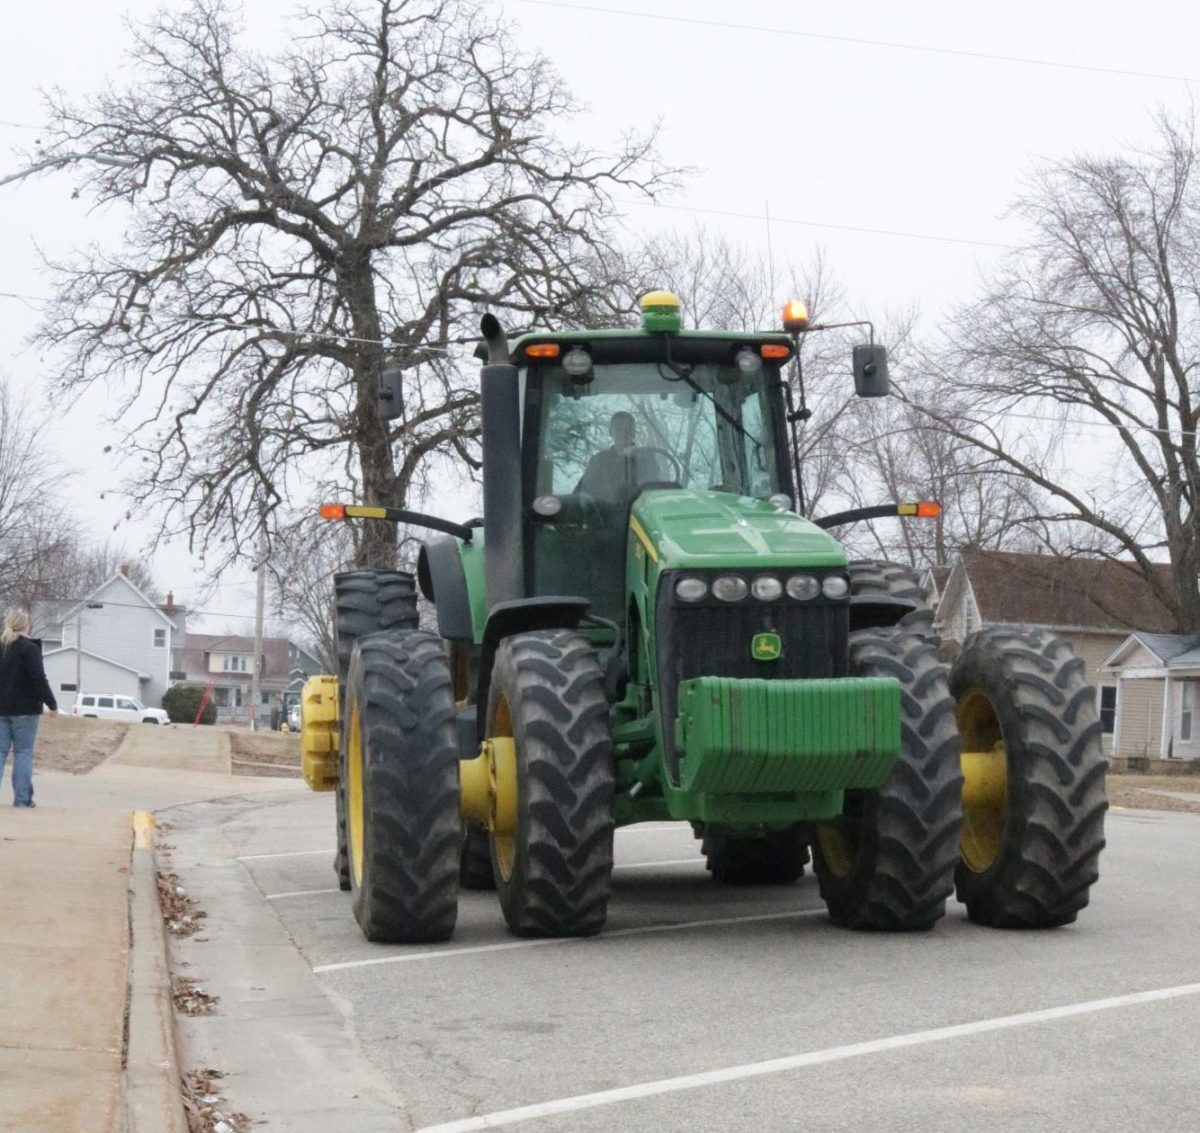 An FFA member drives his John Deere tractor to school. Students watched his tractor as he pulled in. 